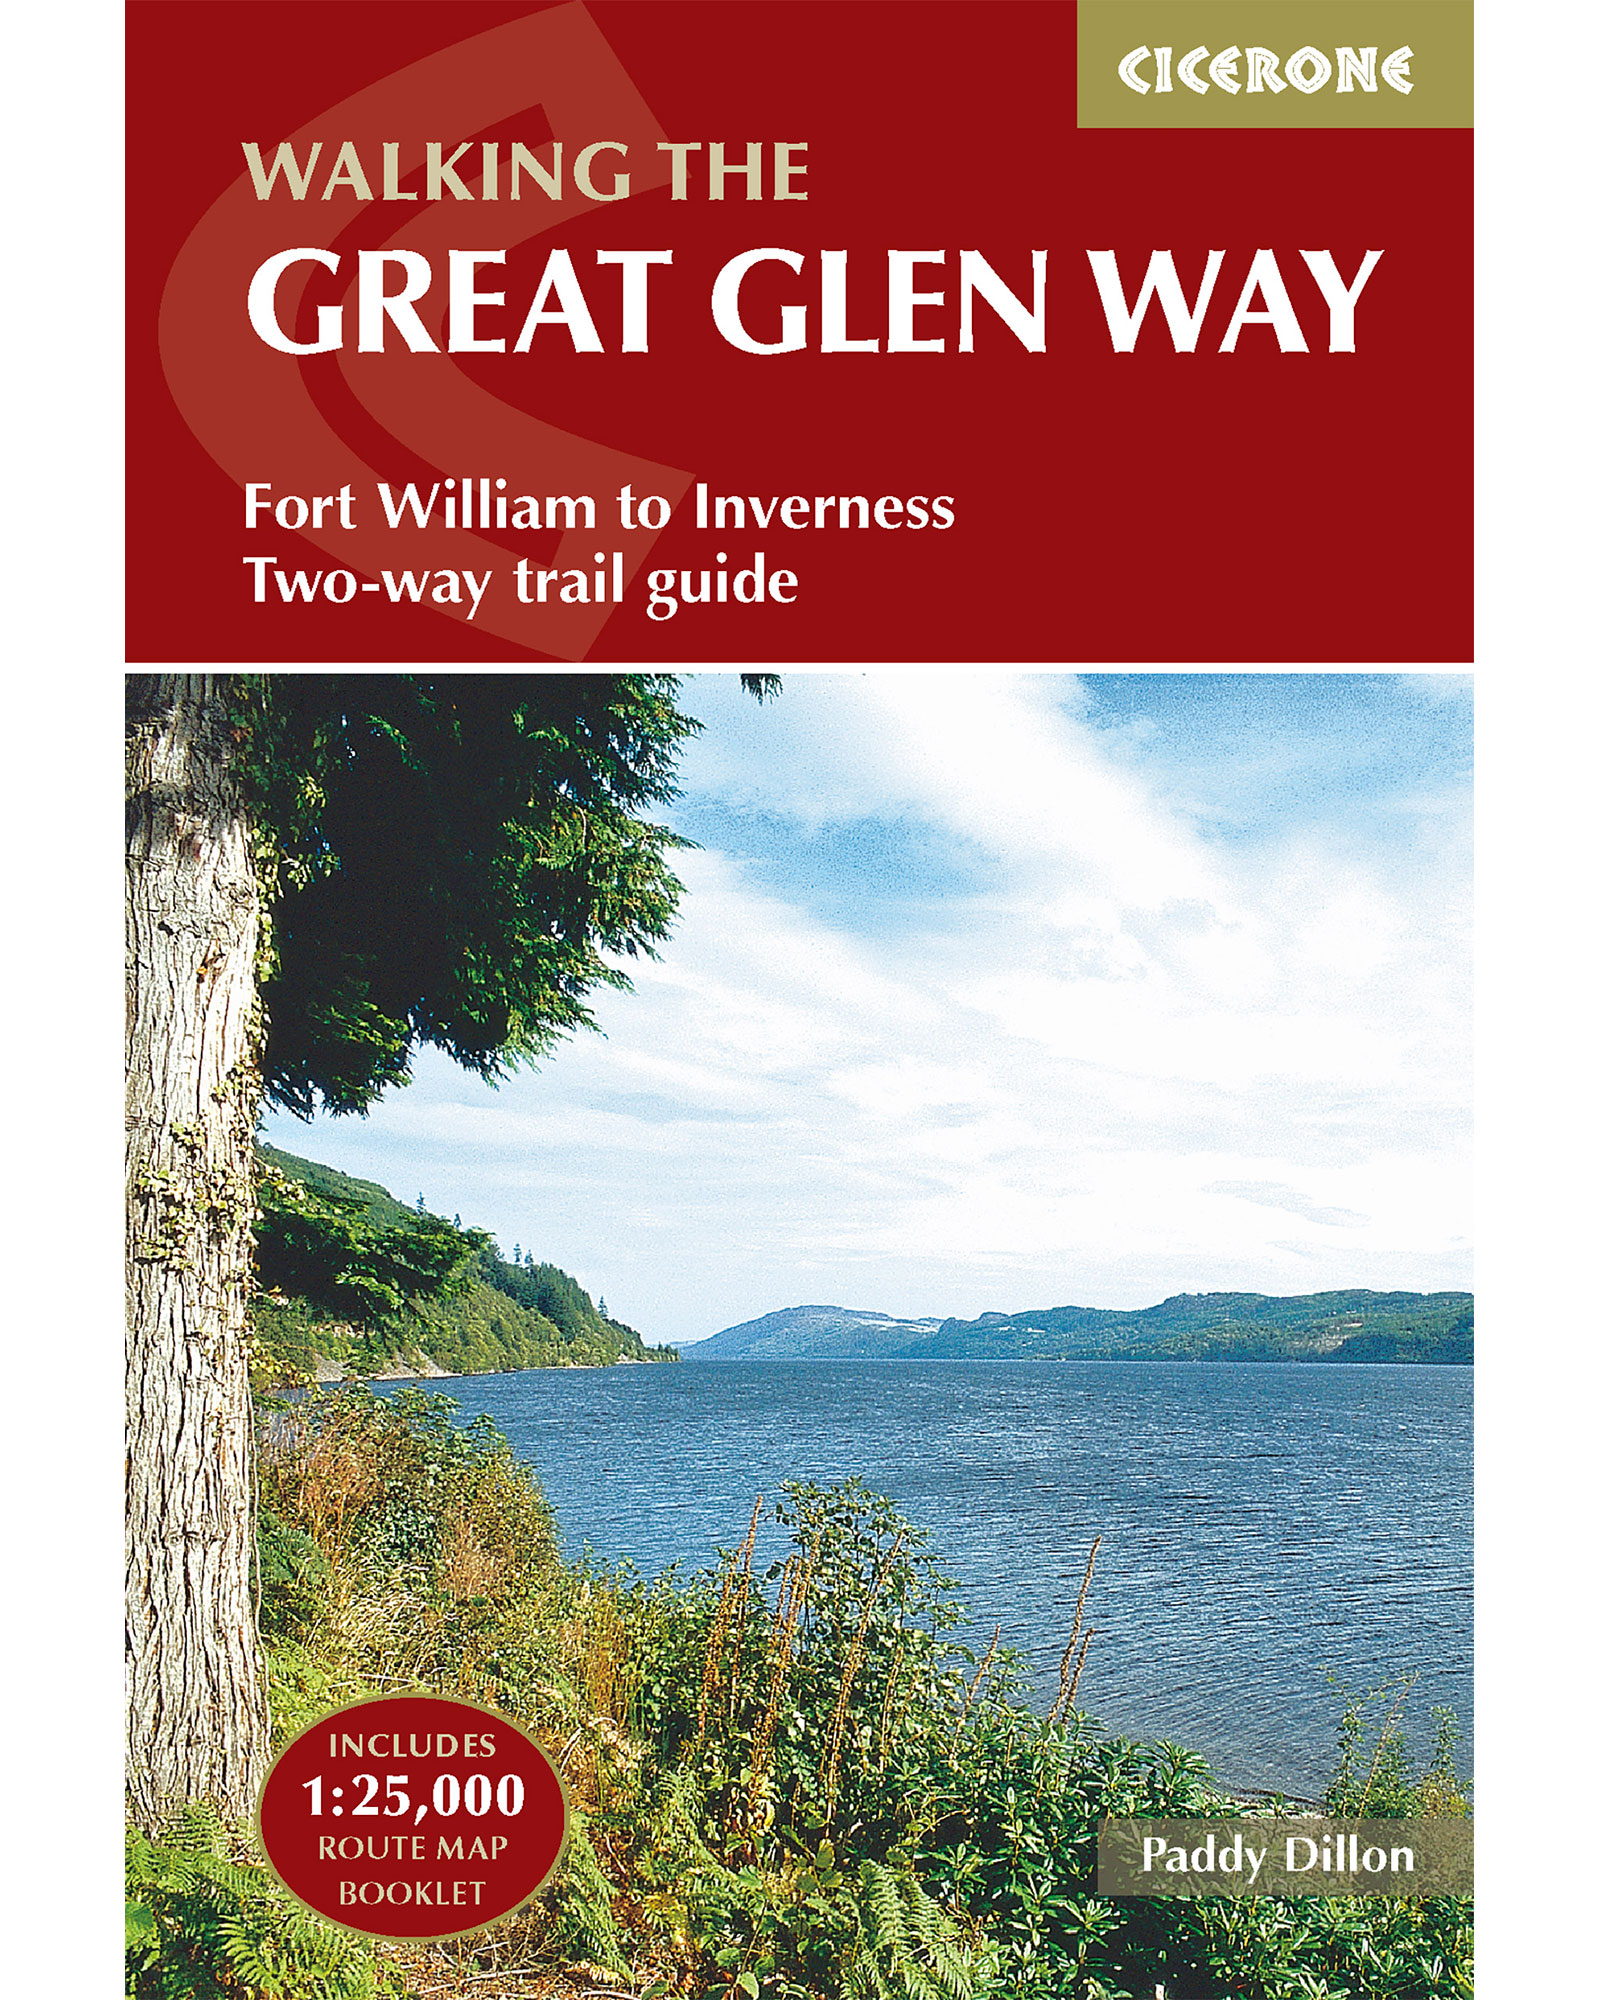 Cicerone The Great Glen Way Guide Book